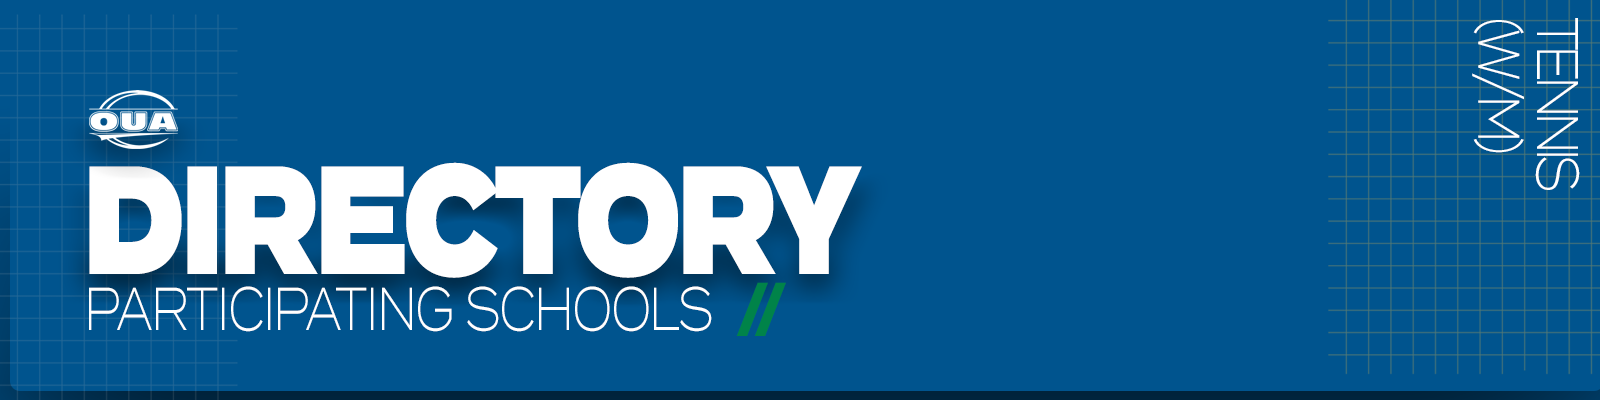 Predominantly blue graphic with large white text on the left side that reads 'Directory, Participating Schools' and small white vertical text on the right side that reads 'Tennis'